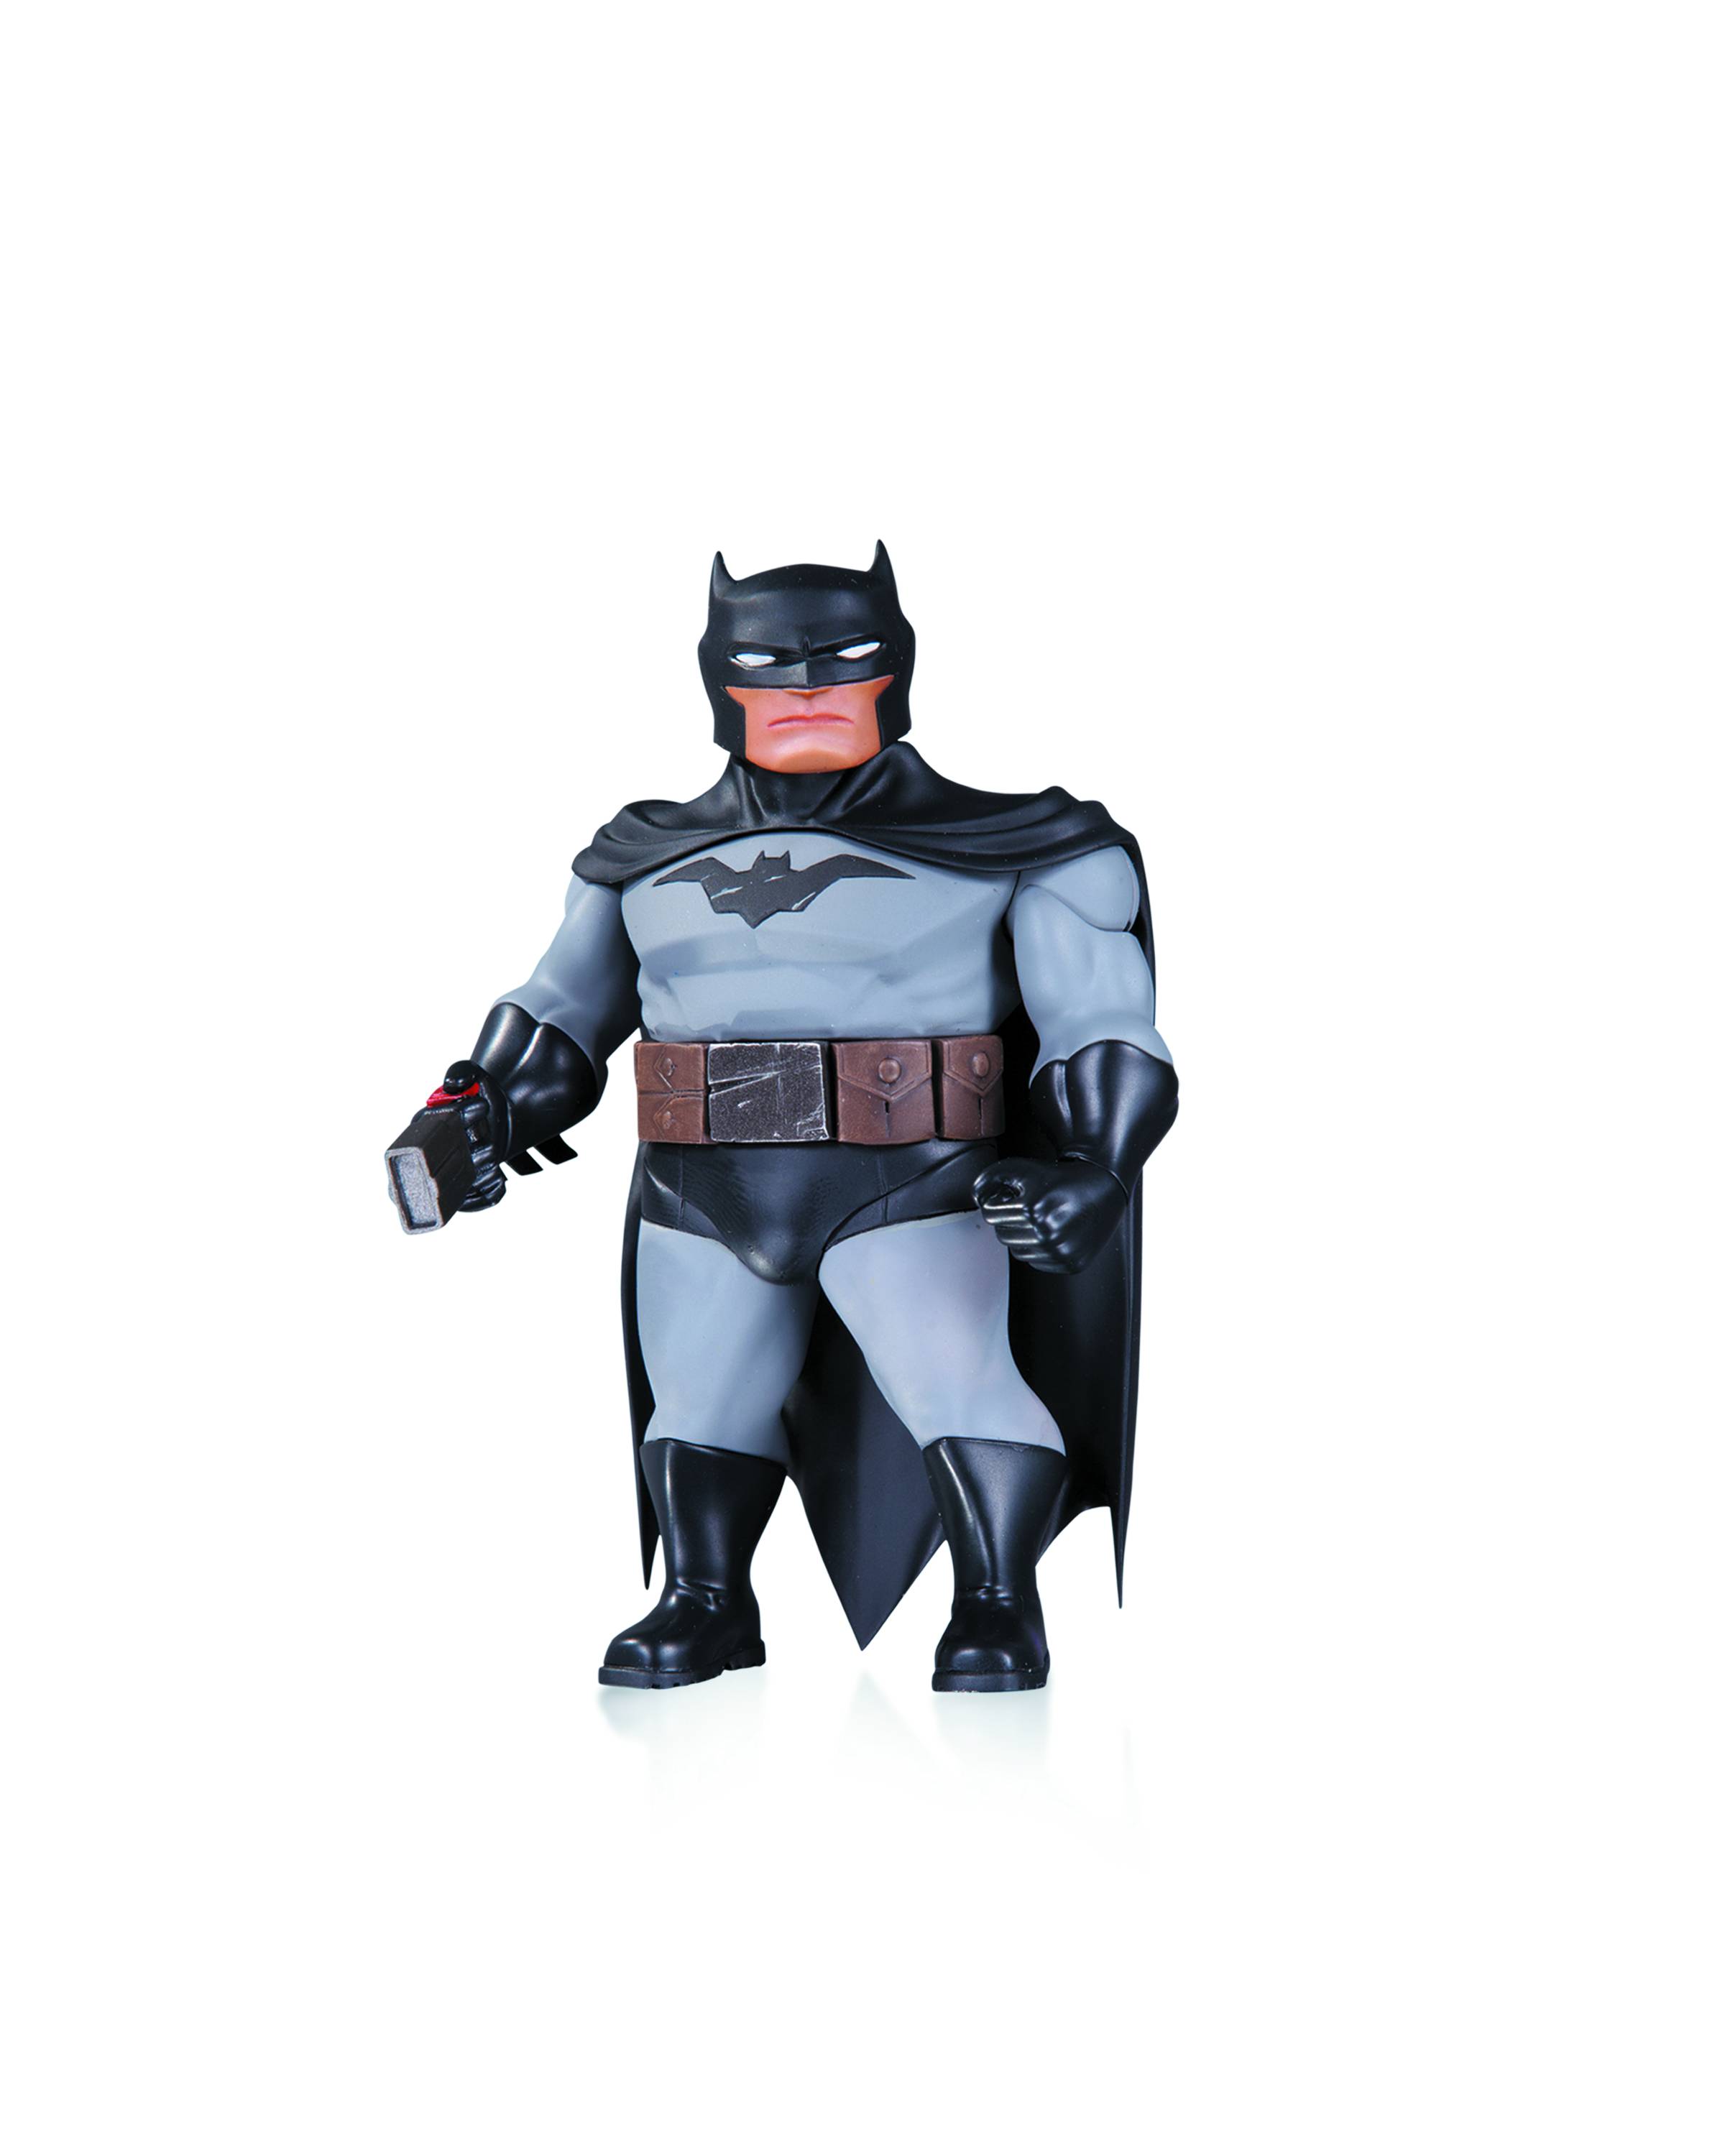 The Very Tiny Dark Knight! Batman: Li'l Gotham Figures From DC Collectibles  - Previews World